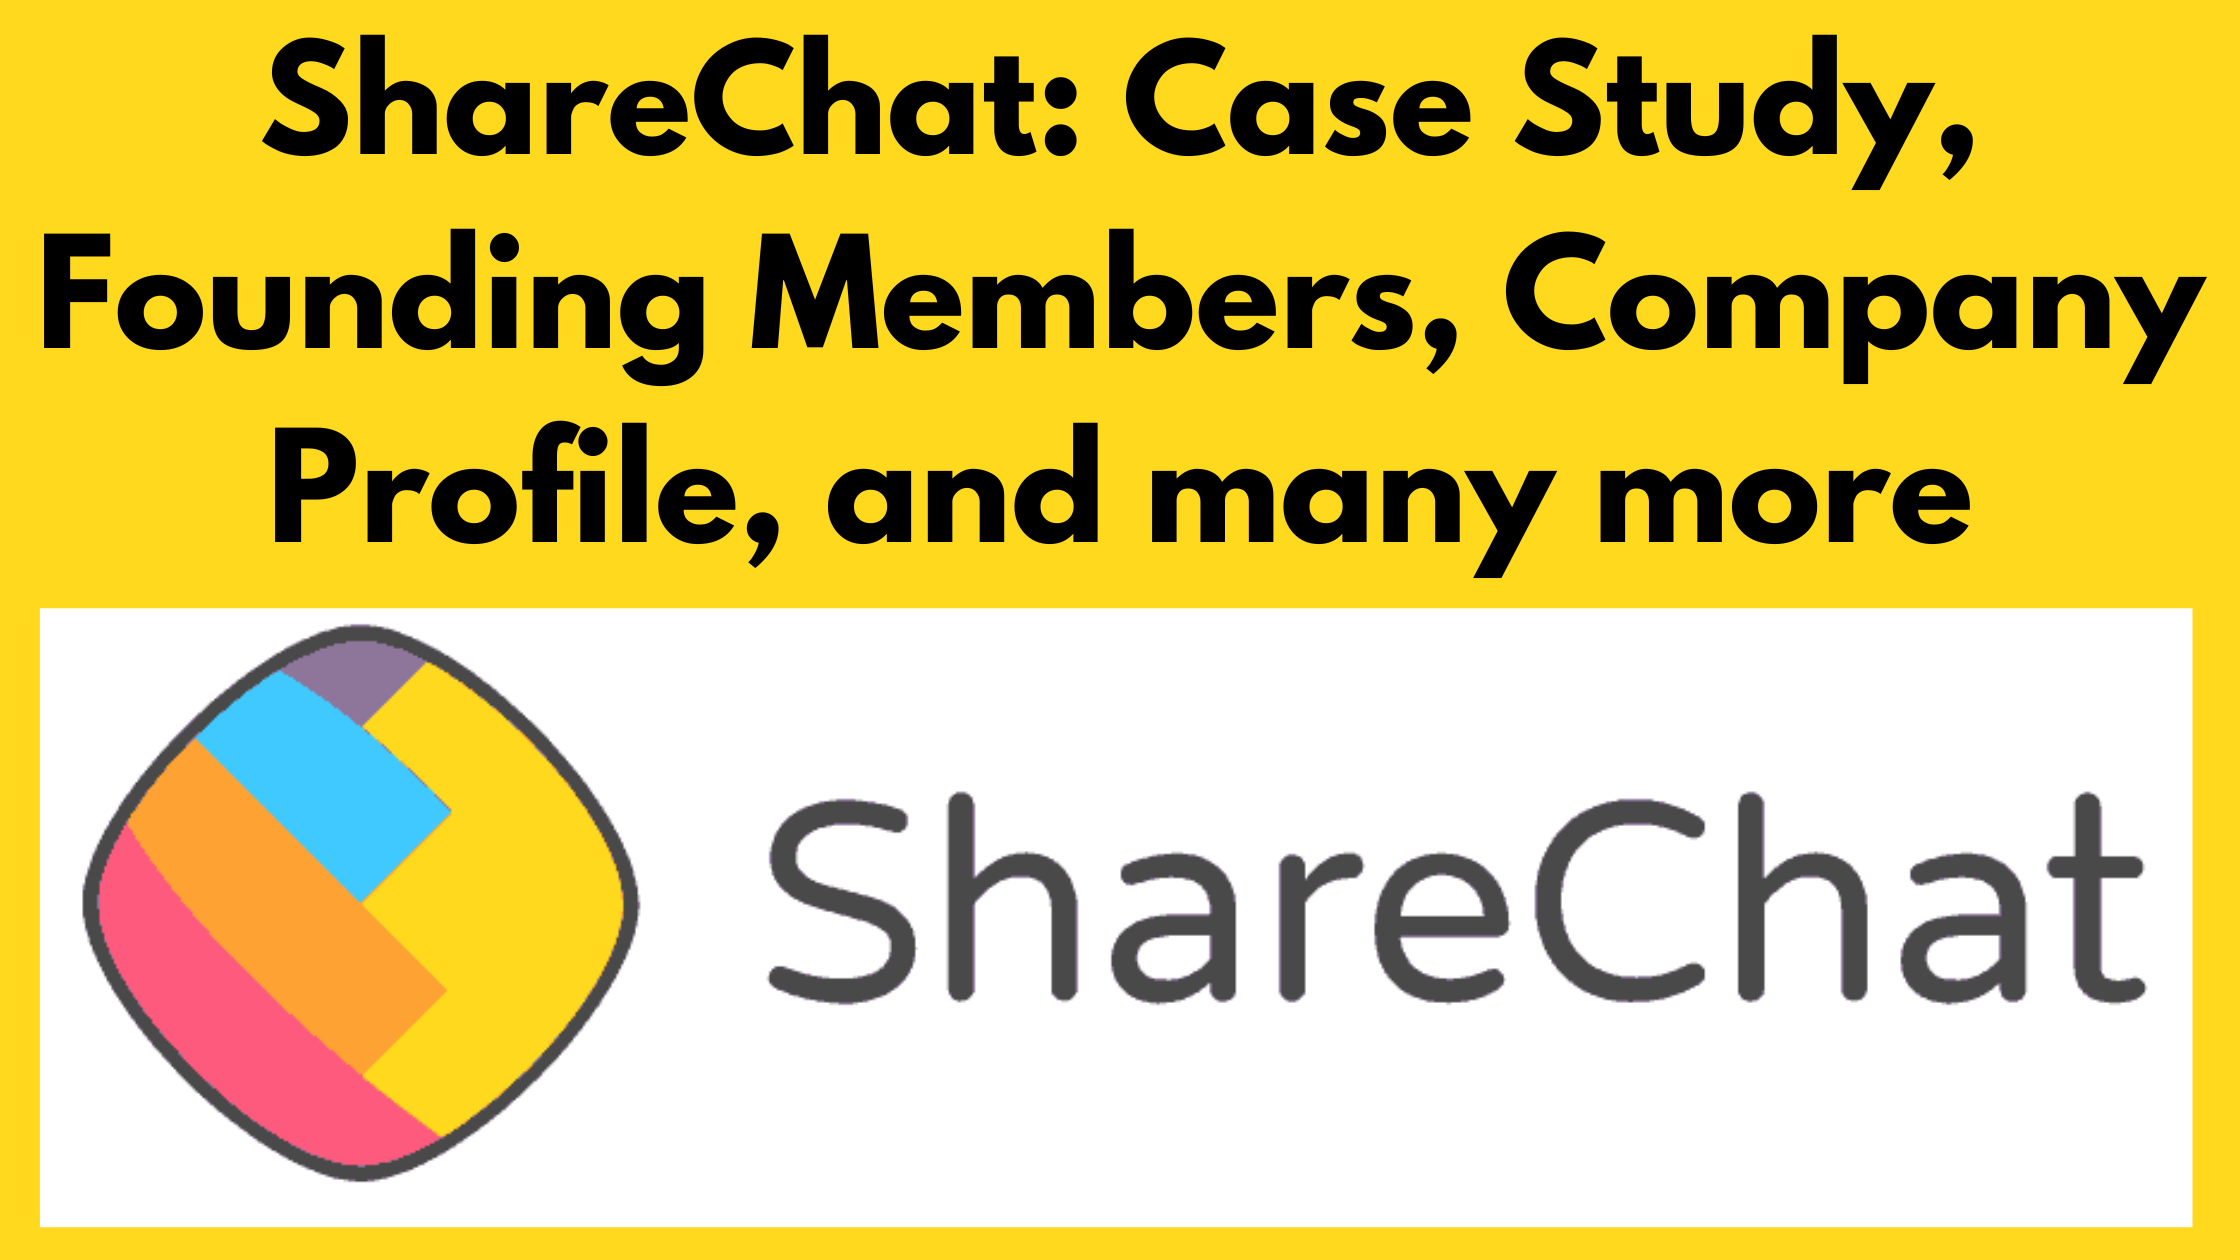 ShareChat: Case Study, Founding Members, Company Profile, and many more